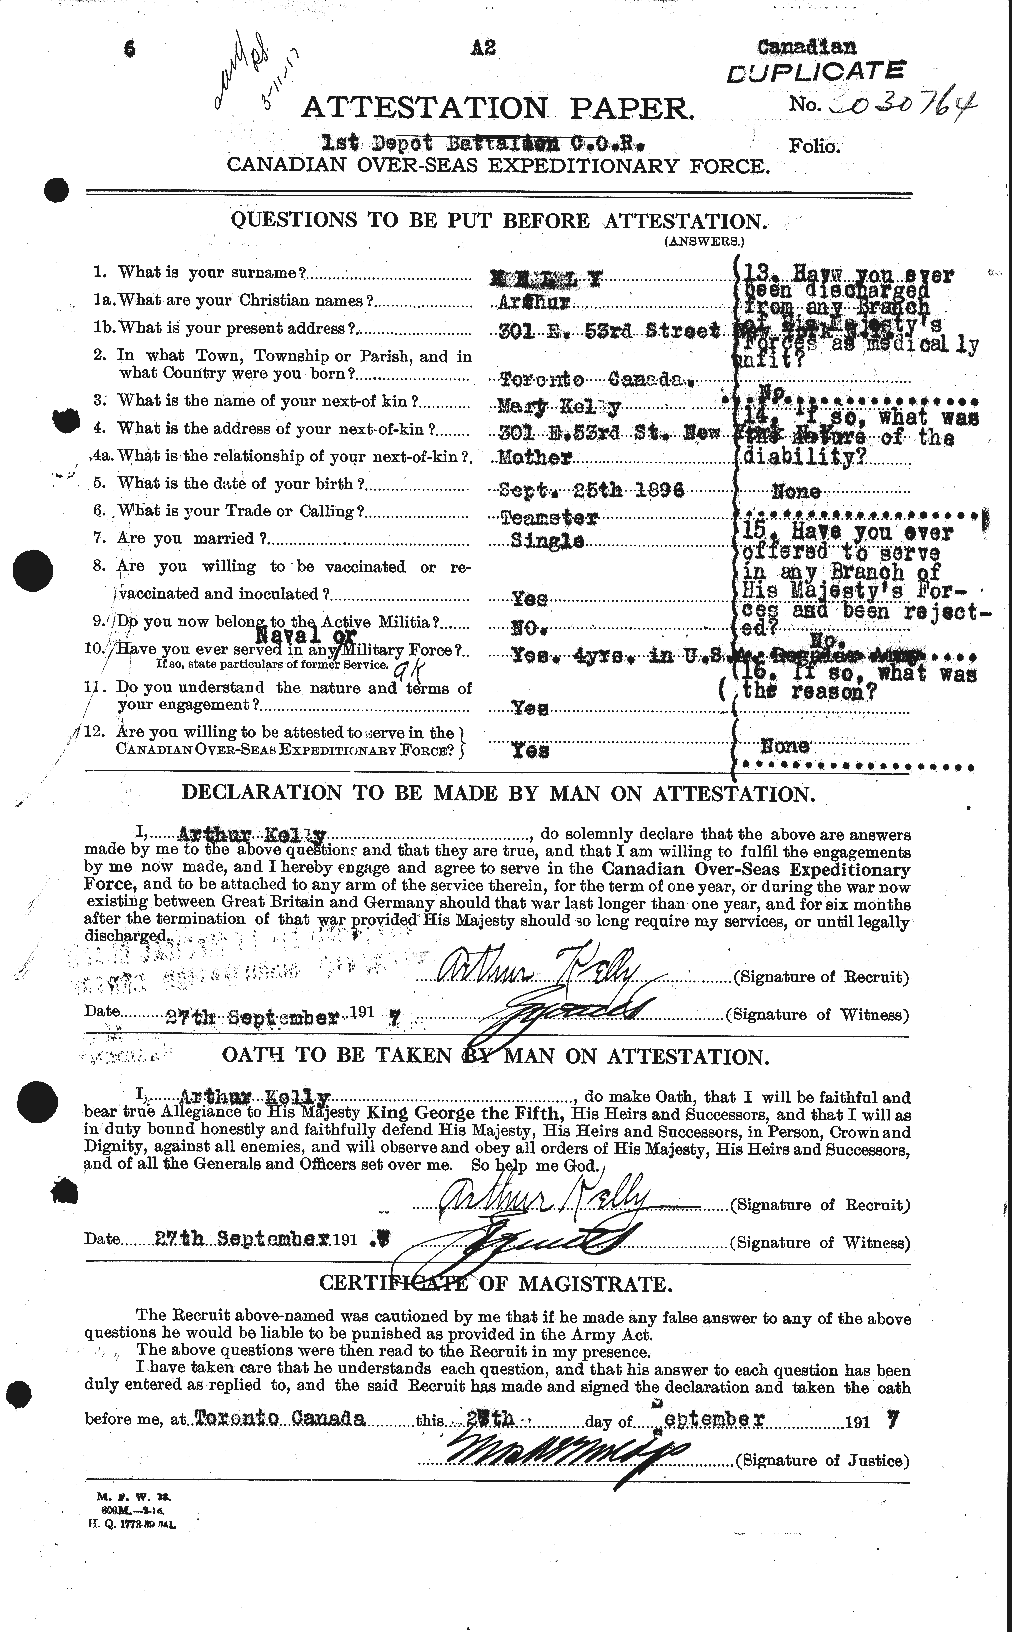 Personnel Records of the First World War - CEF 431206a